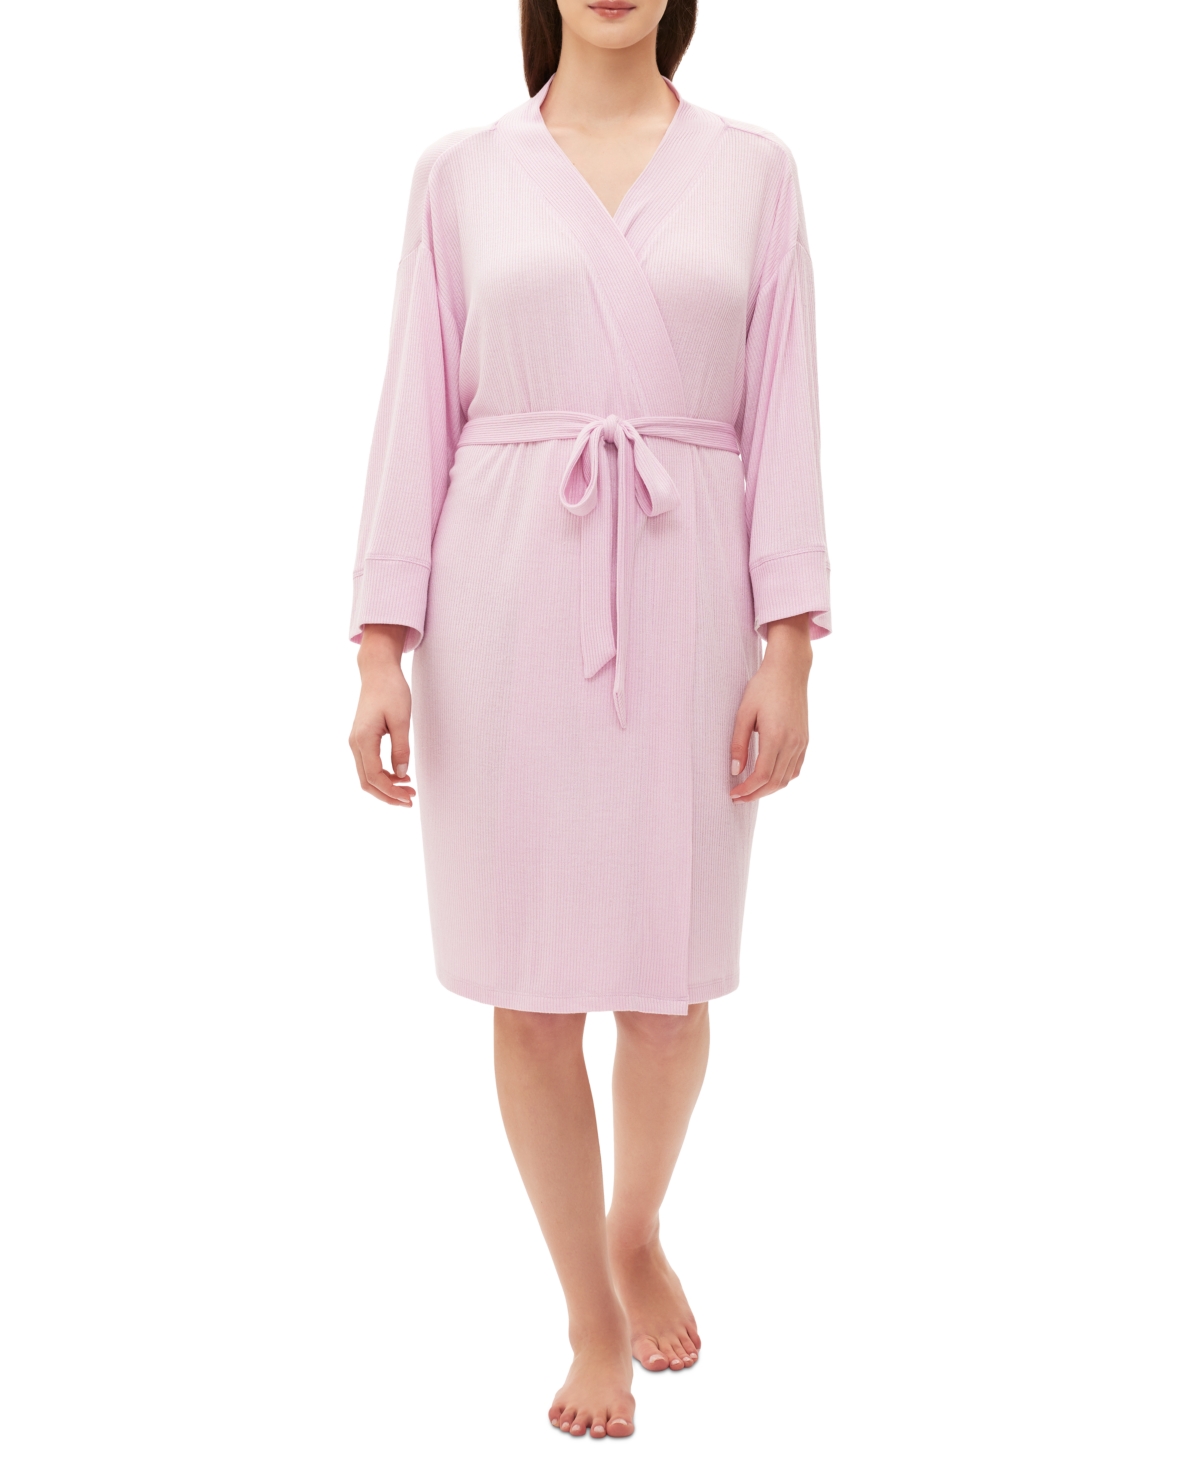 GAPBody Women's Long-Sleeve Ribbed Belted Robe - Butterfly Pink